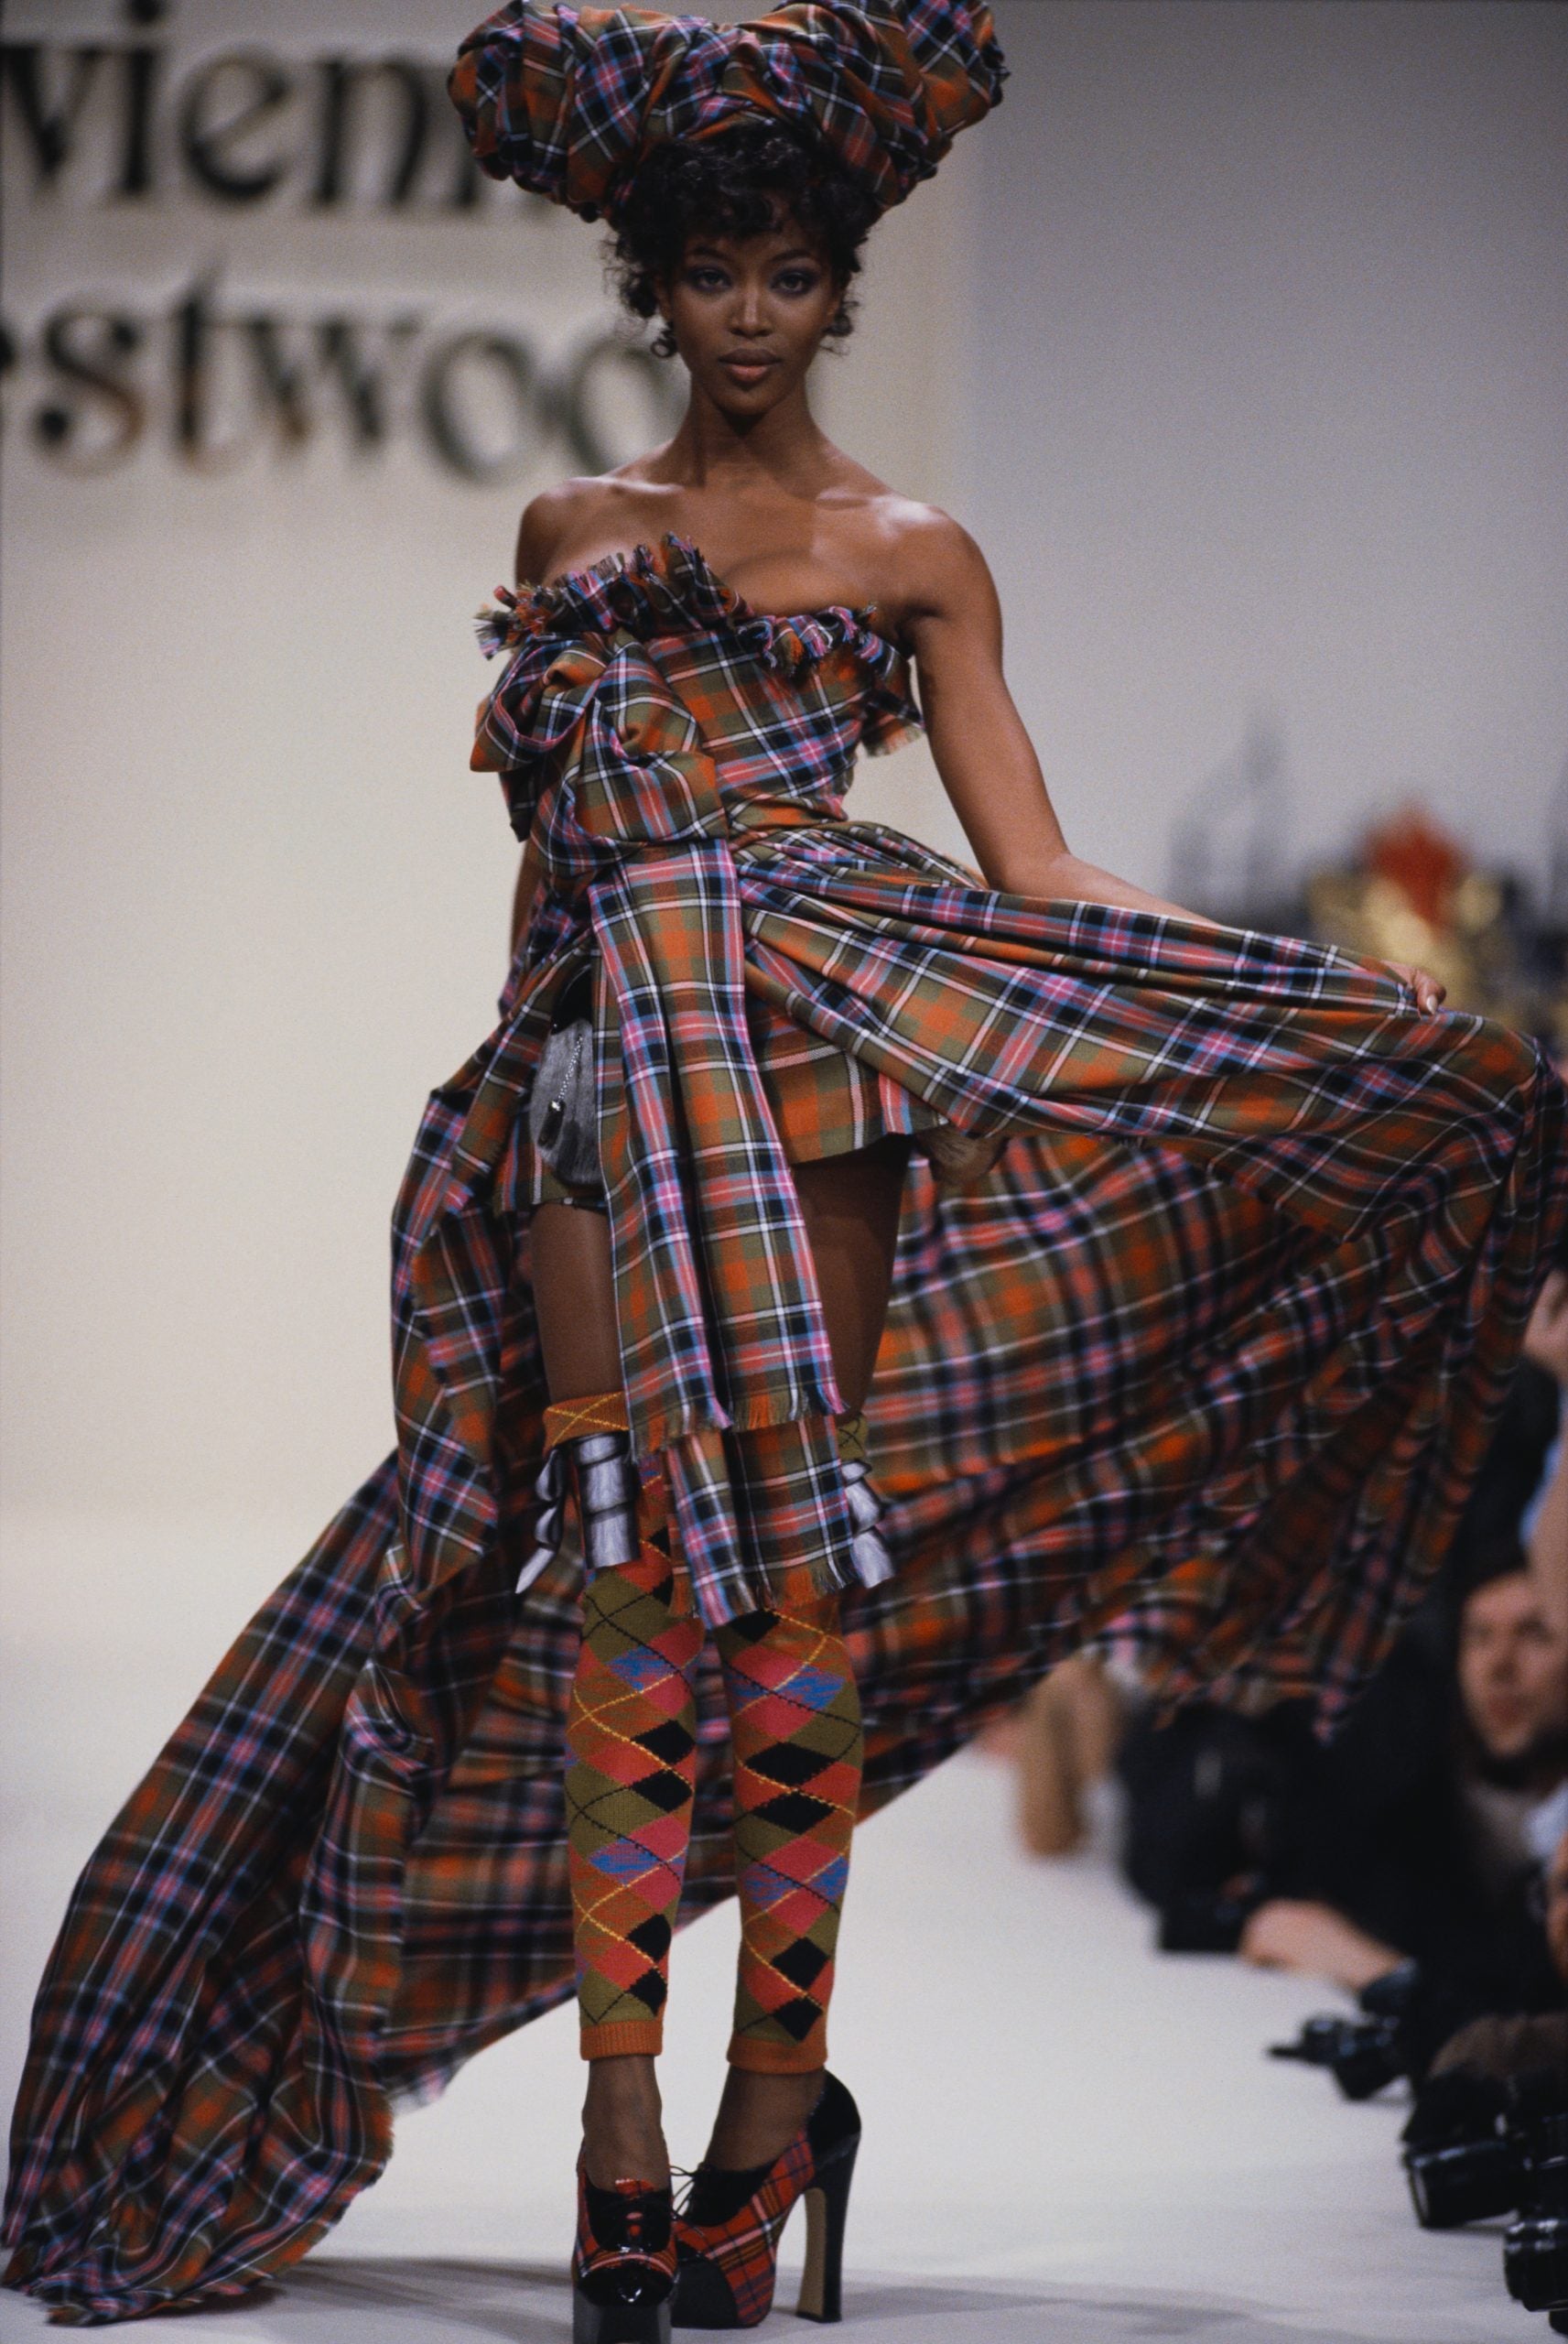 Black Is Punk! Remembering Vivienne Westwood & Why Her Punk Aesthetic Resonates With Black Artists